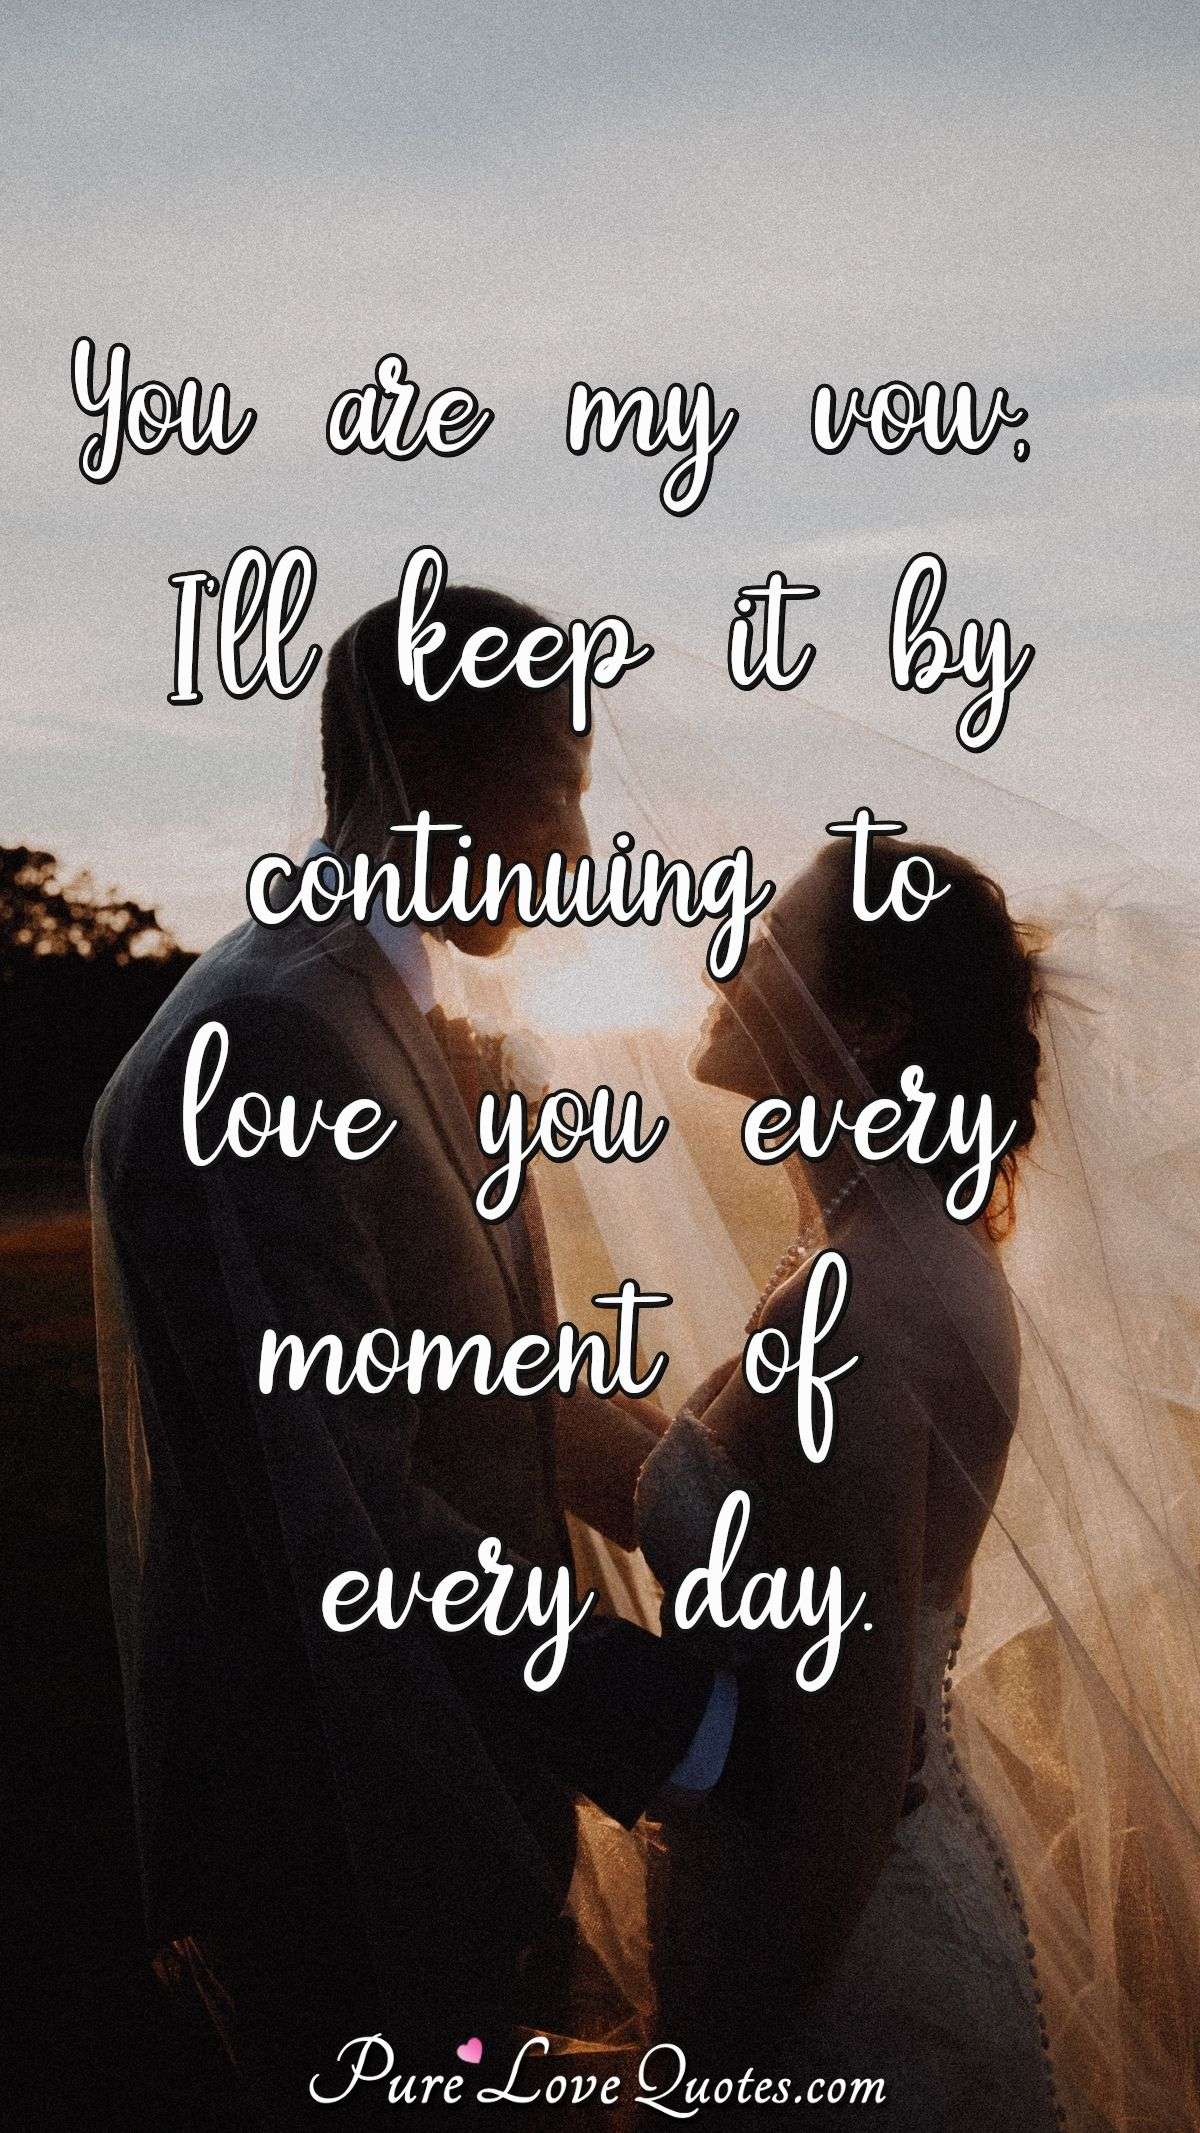 You are my vow, I'll keep it by continuing to love you every moment of every day. - Anonymous